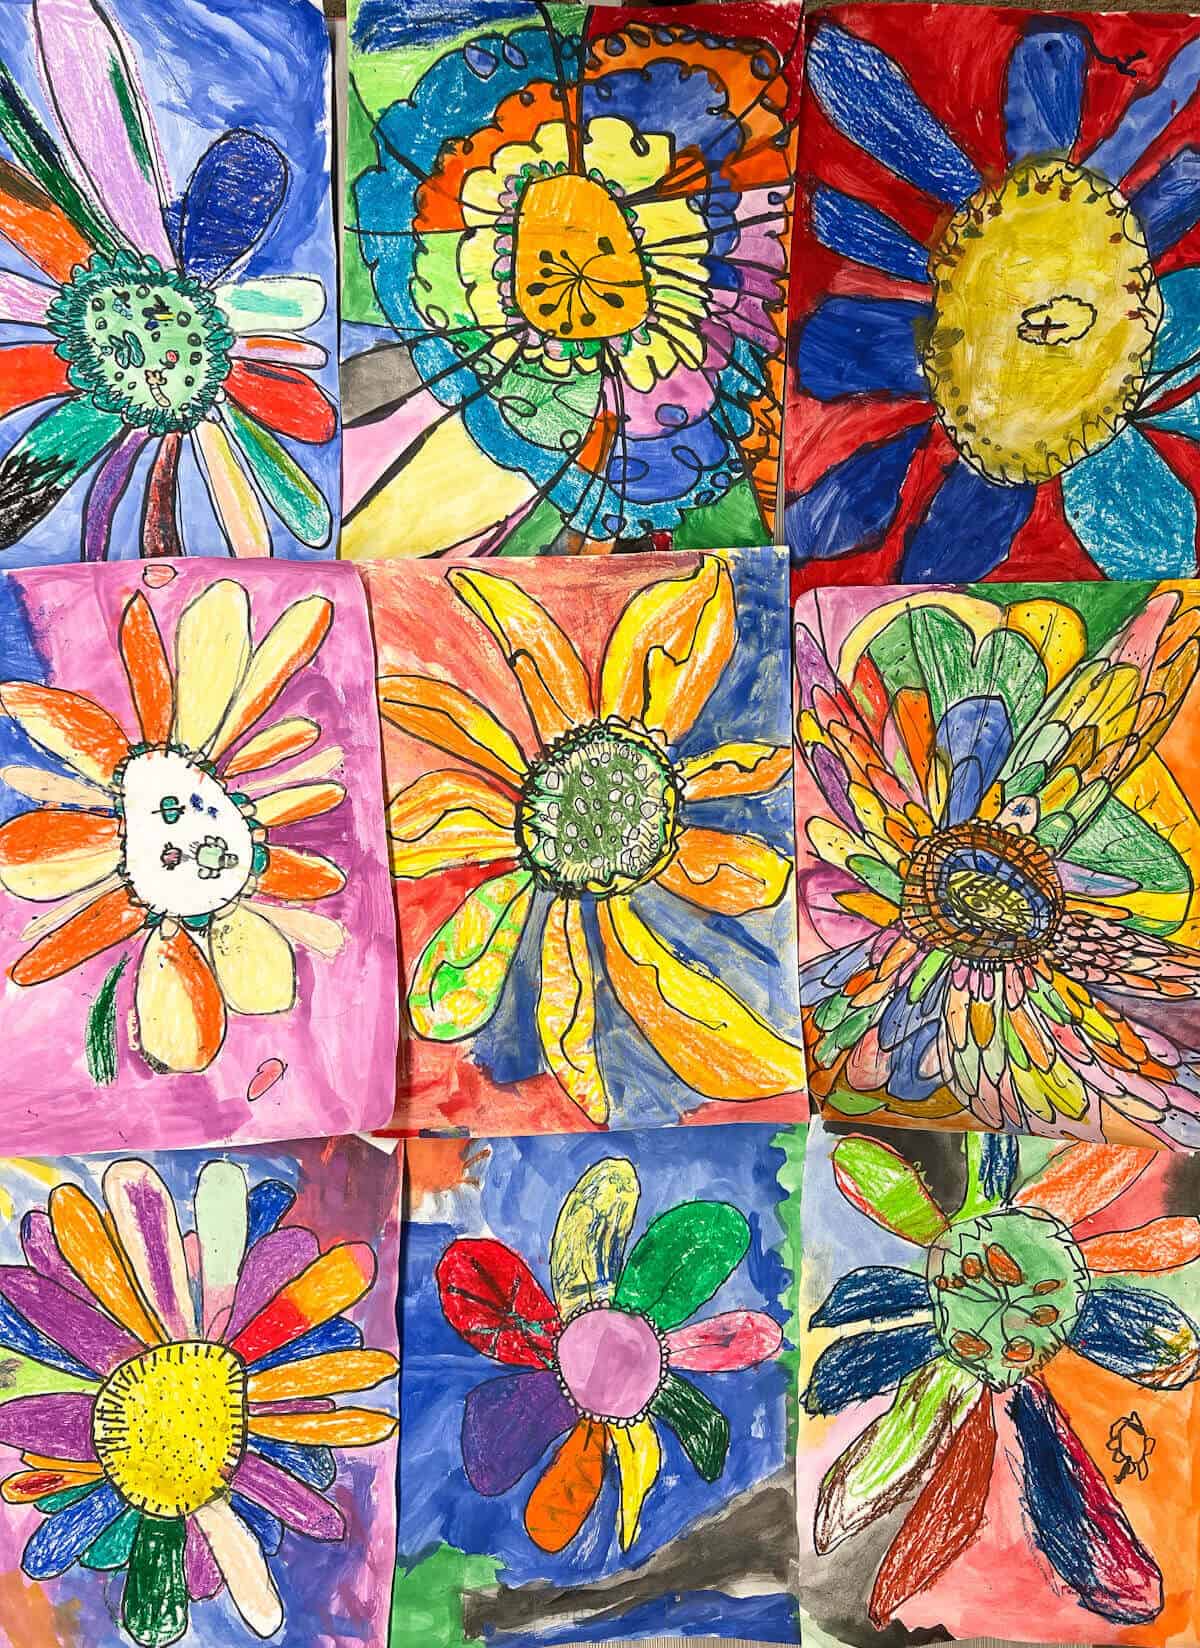 9 different flower paintings for kids inspired by Georgia O'Keeffe.